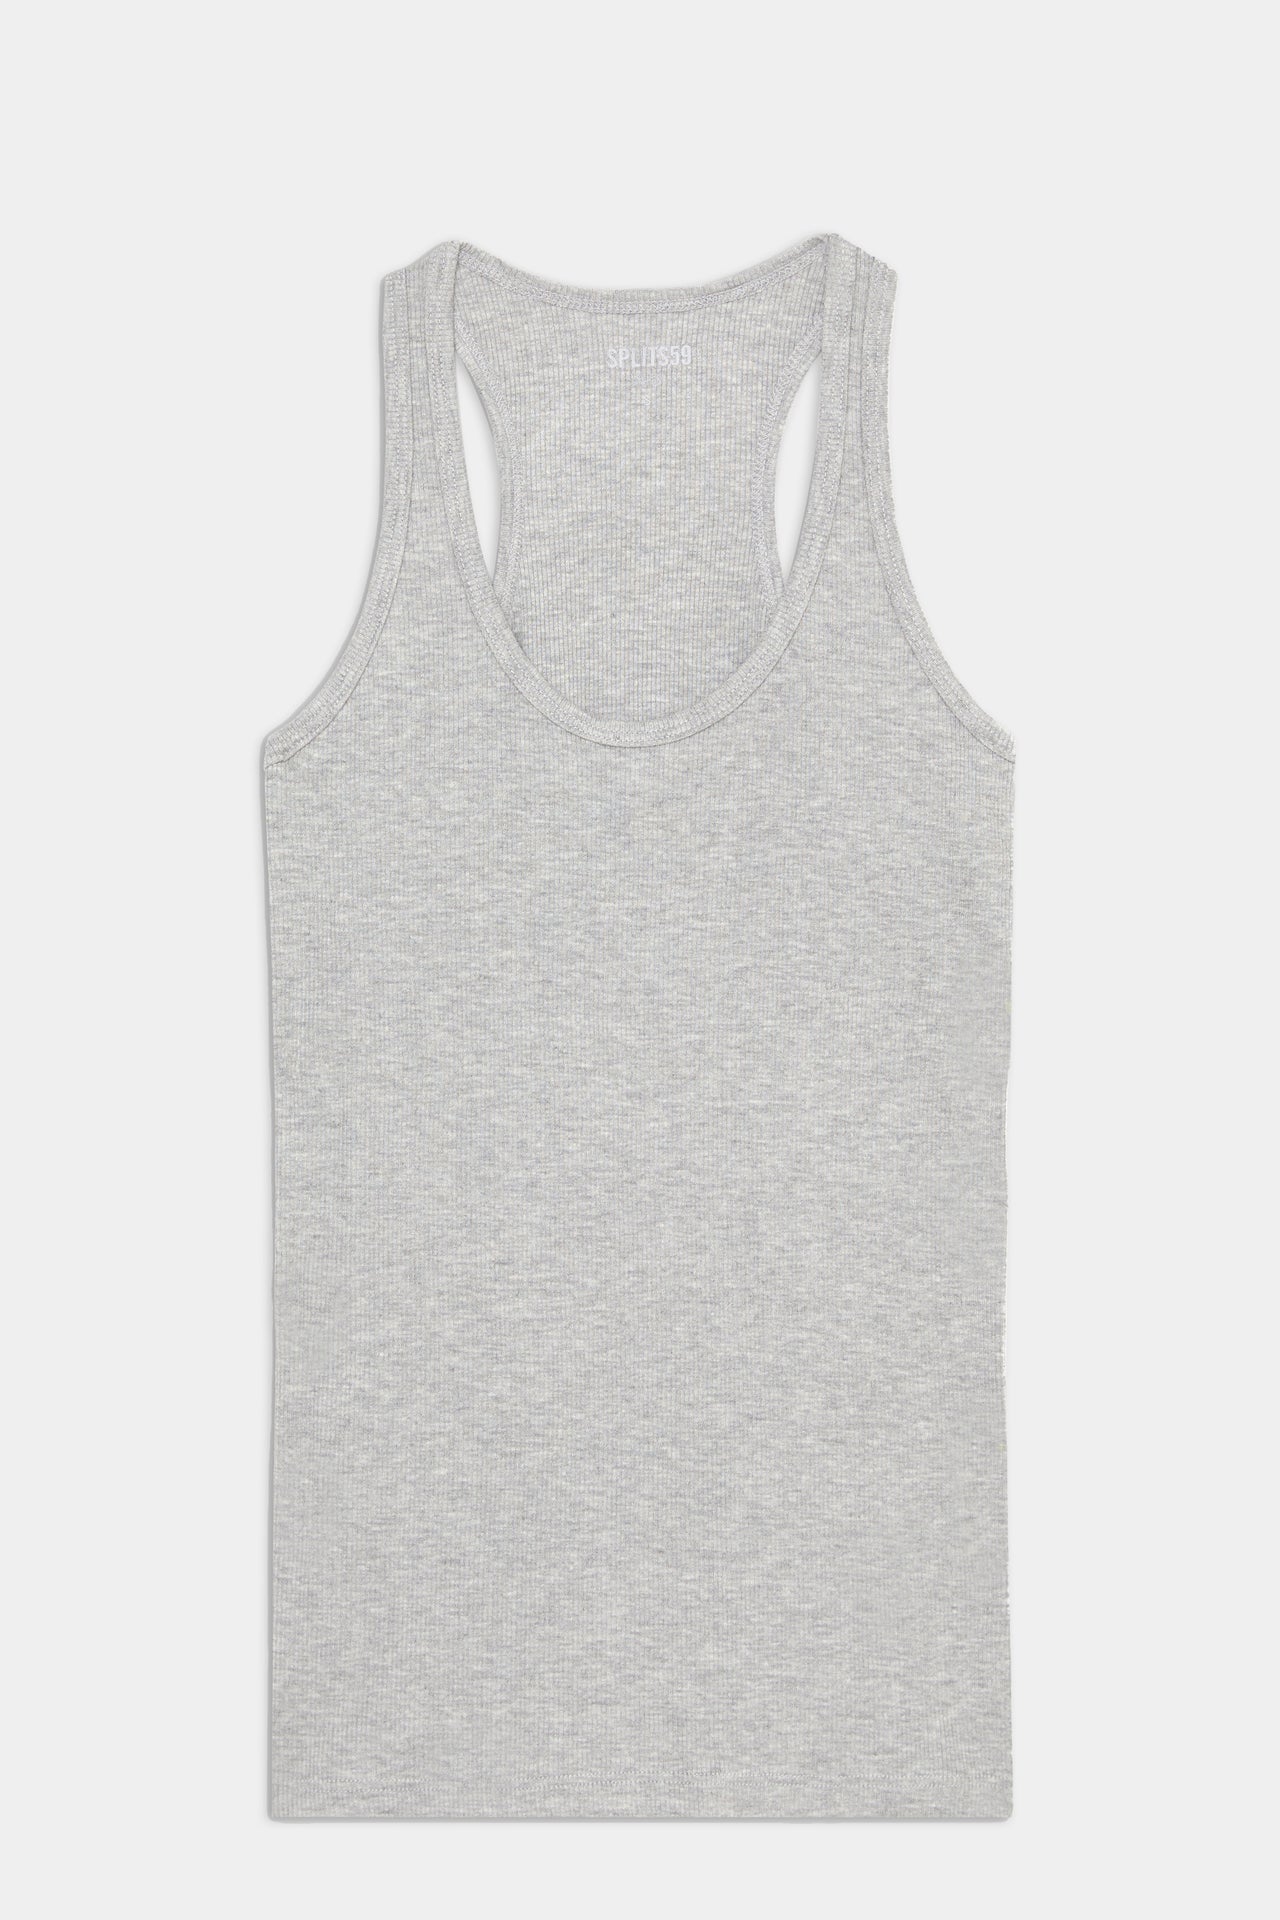 A gray sleeveless SPLITS59 Ashby Trio Bundle tank top displayed against a white background.